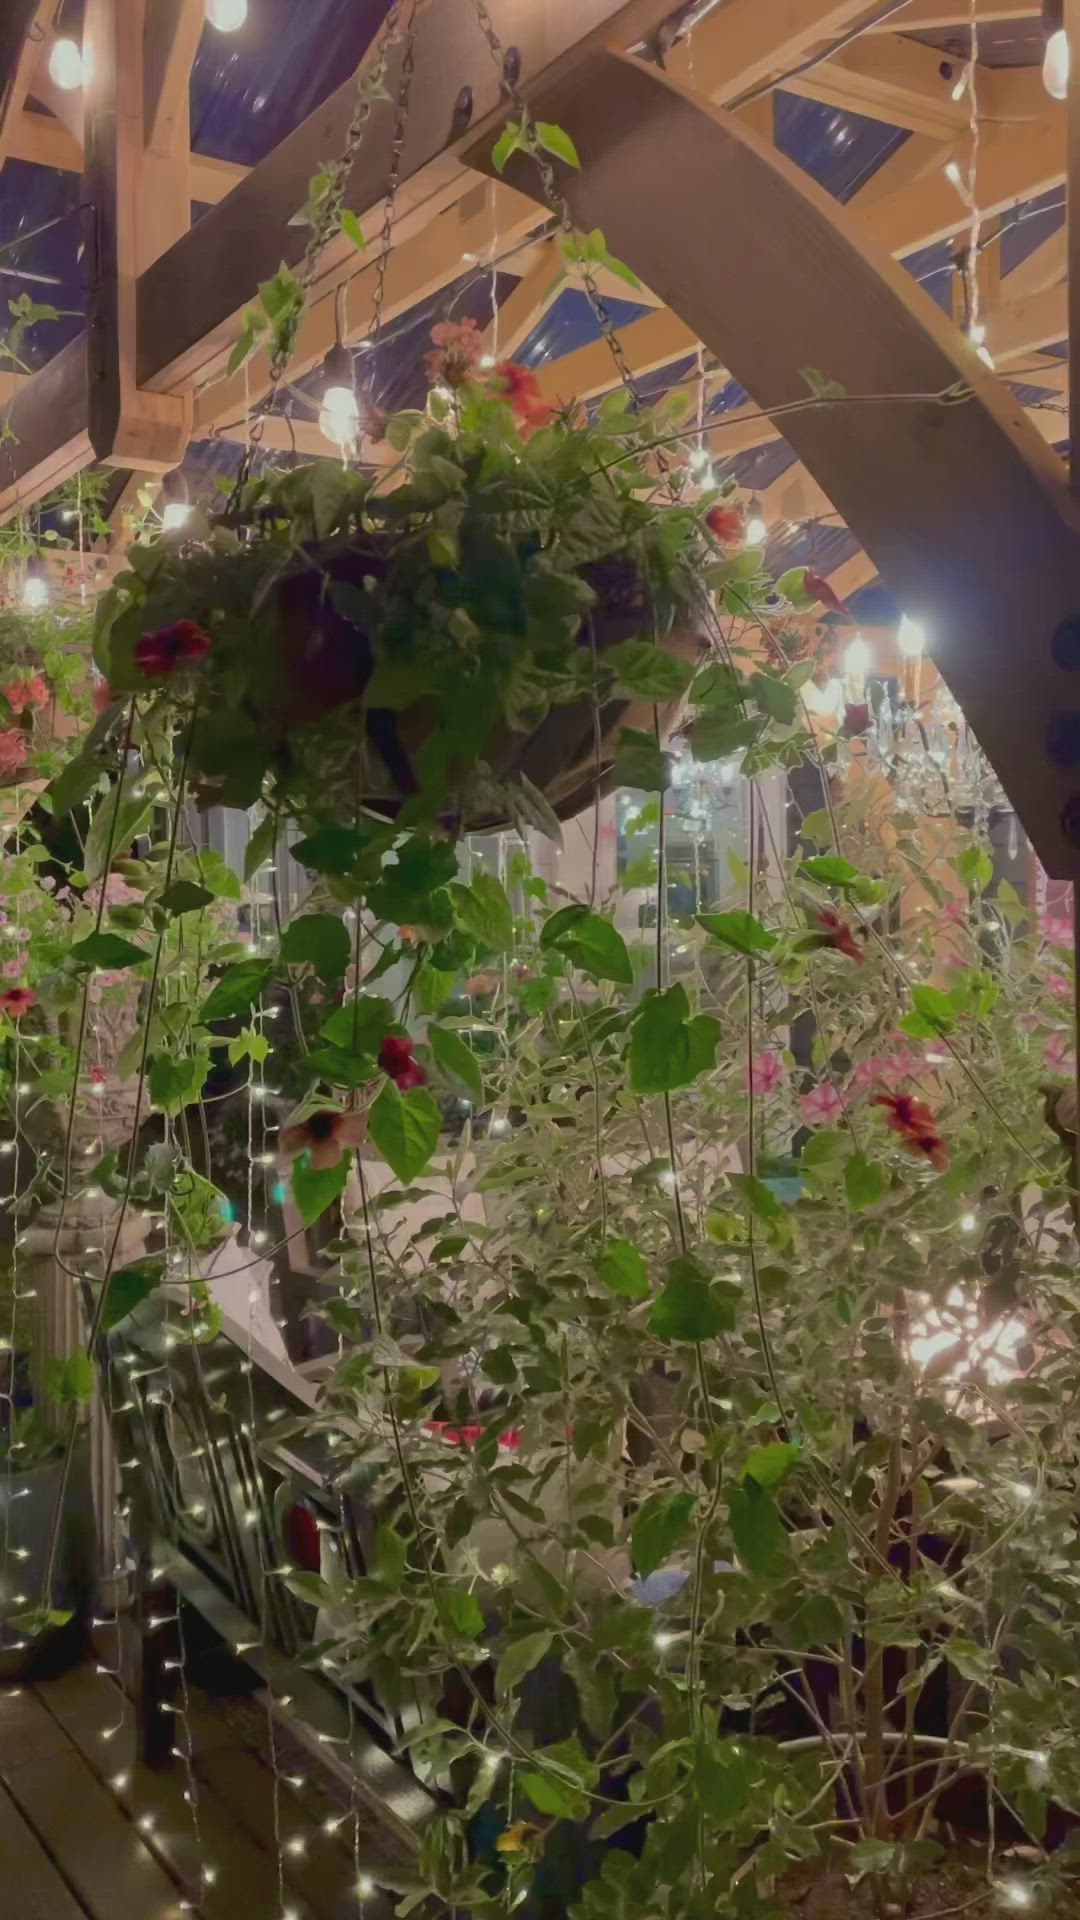 This may contain: an outdoor patio with plants and lights hanging from the ceiling